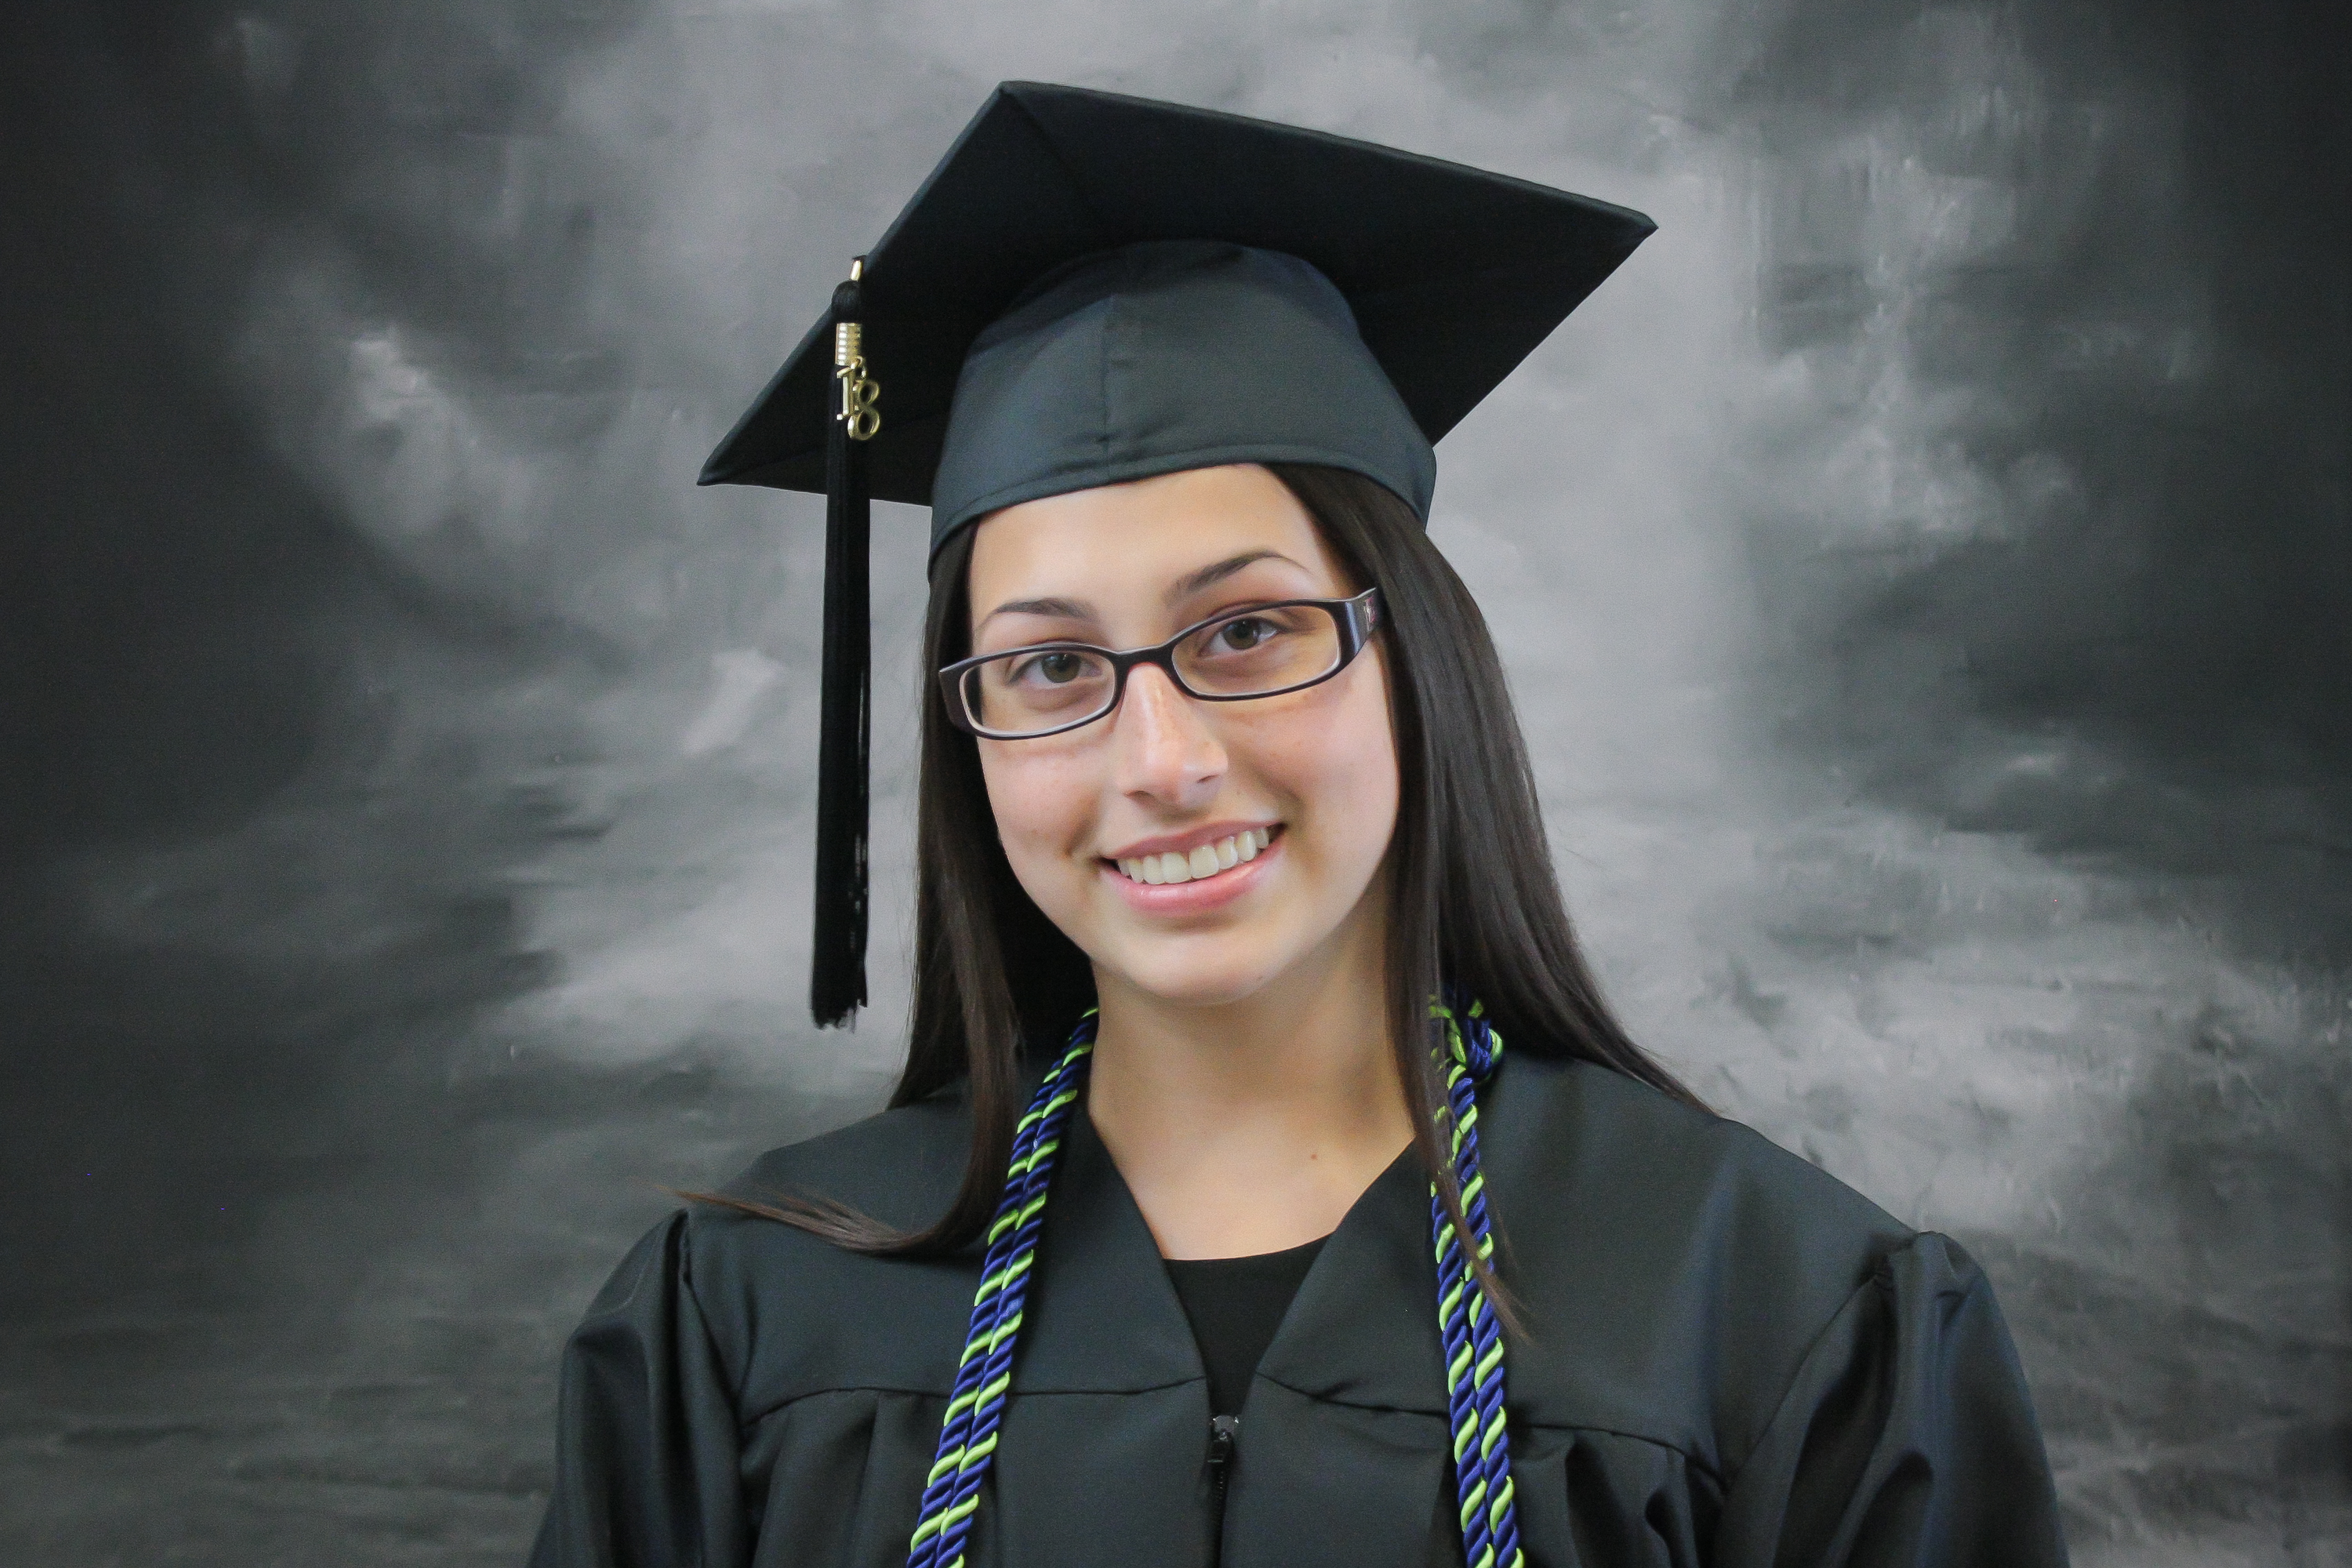 Photo for Dual Enrollment Student Earns High School Diploma and Associate Degree Simultaneously